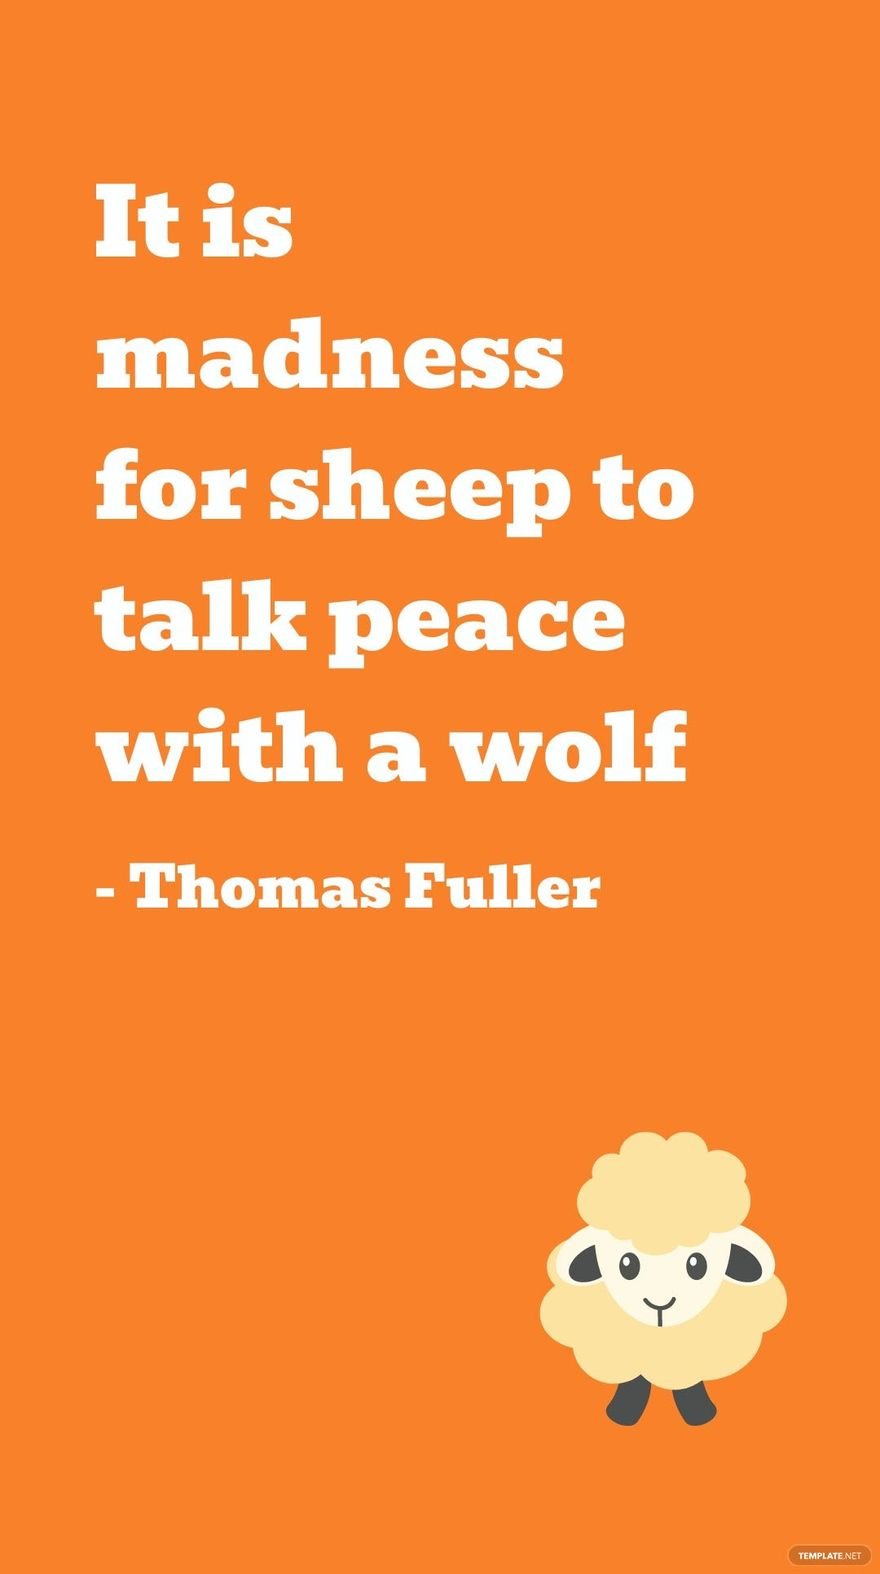 Thomas Fuller - It is madness for sheep to talk peace with a wolf